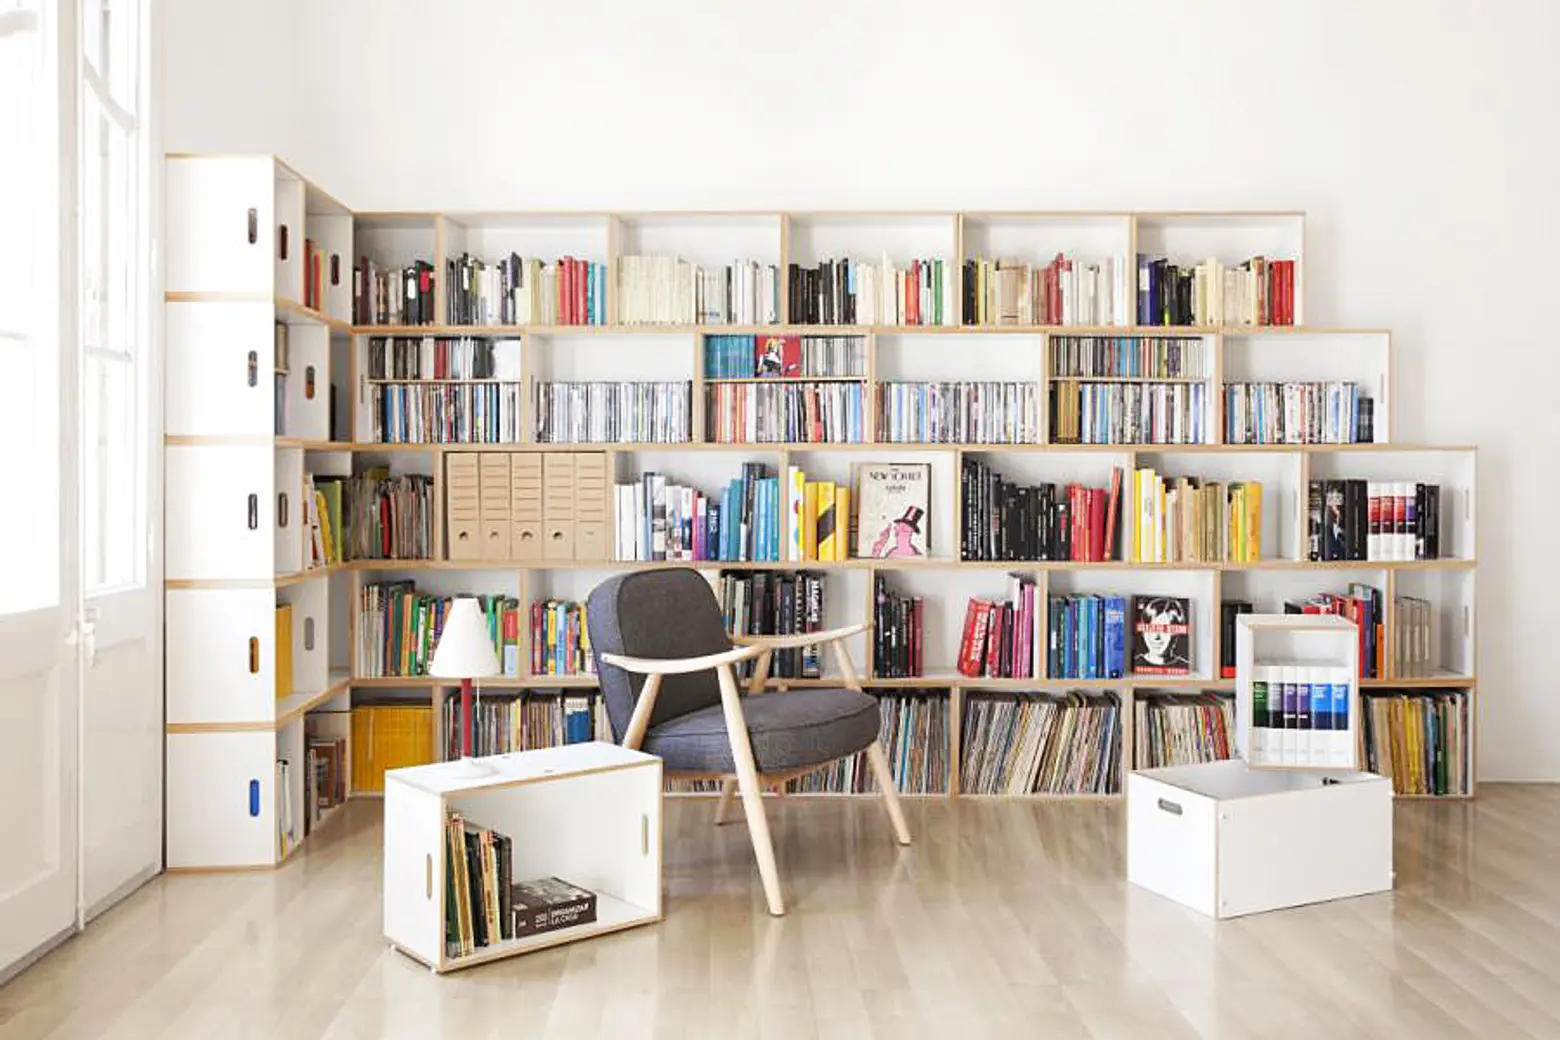 Use BrickBox Modular Shelving to Store Books, Create Room Partitions or Move Homes